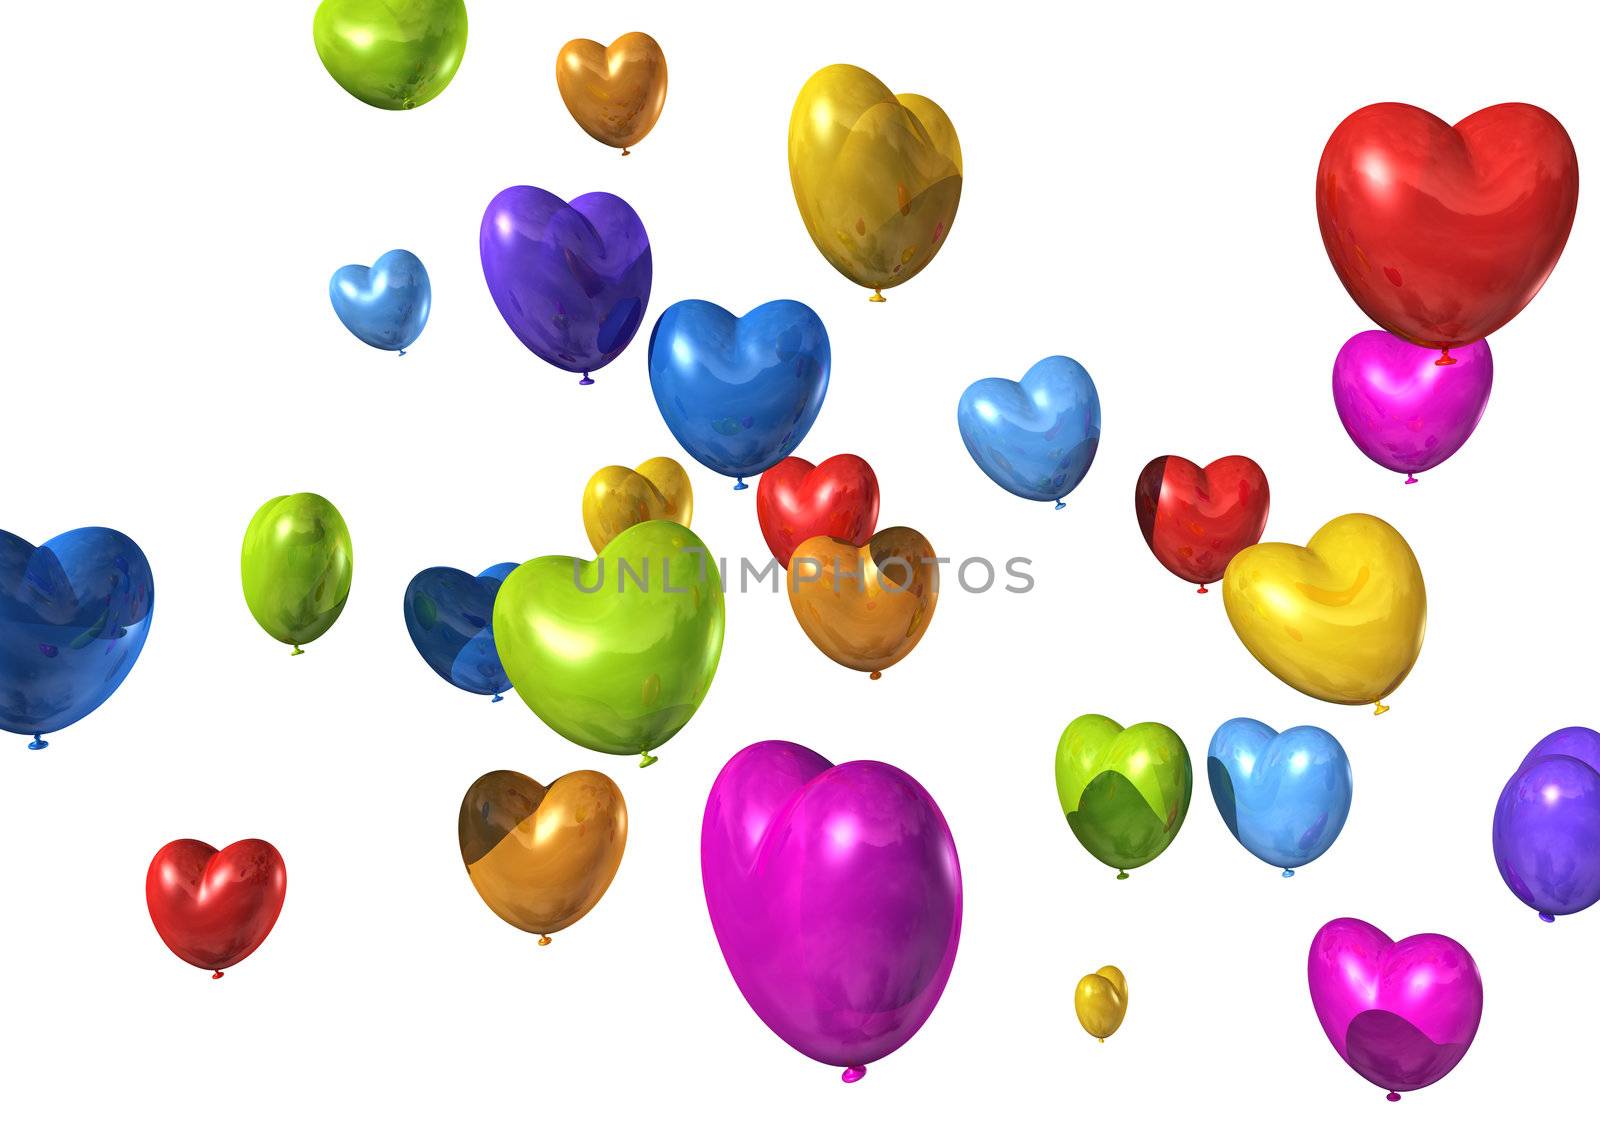 colored heart shaped balloons isolated on white by daboost